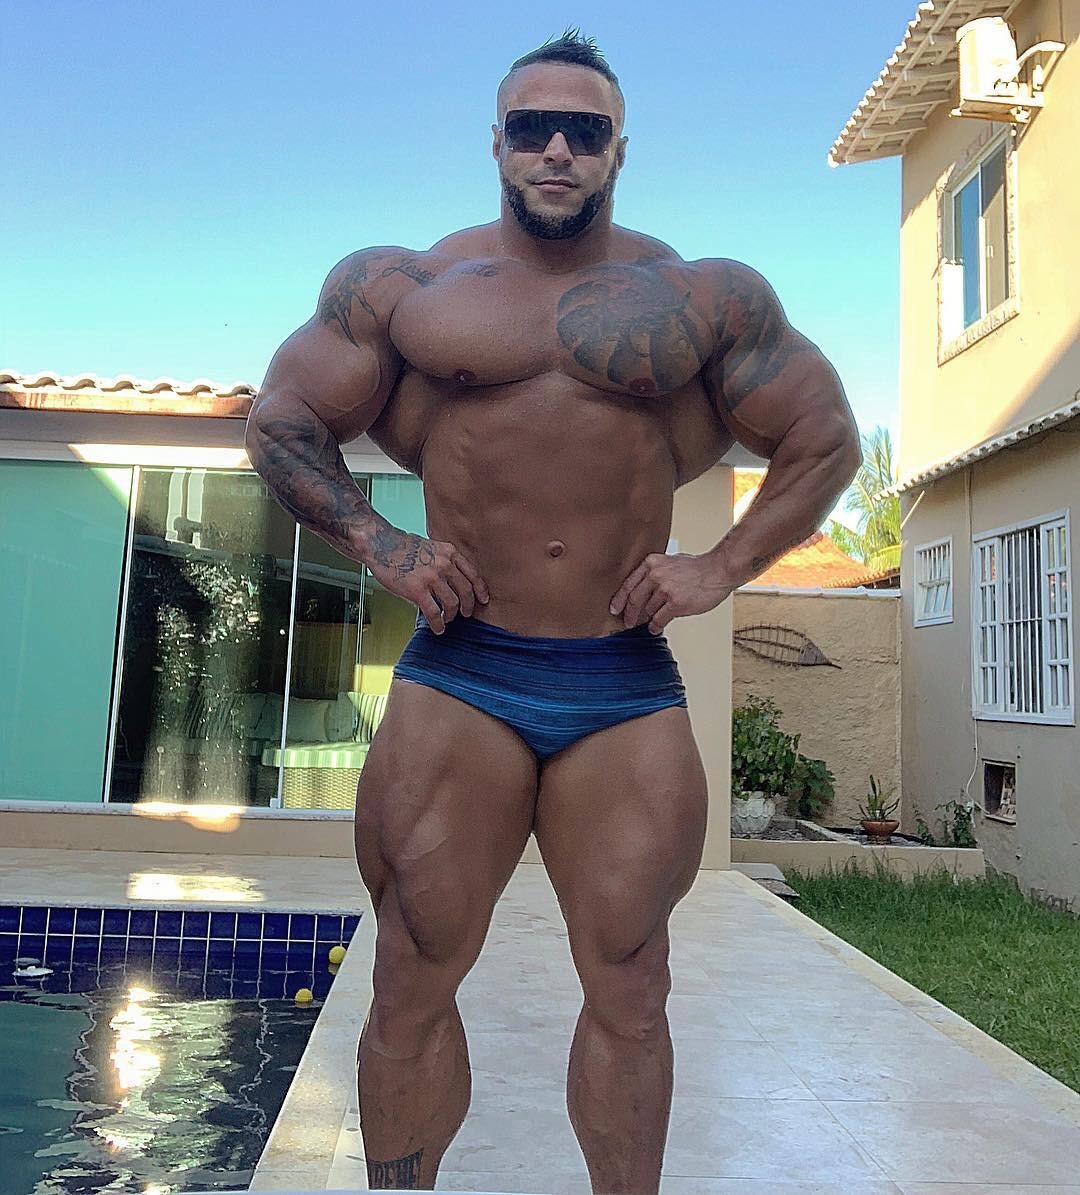 Bruno Moraes - His body is nearing maximum capacity on how much muscle it can contain